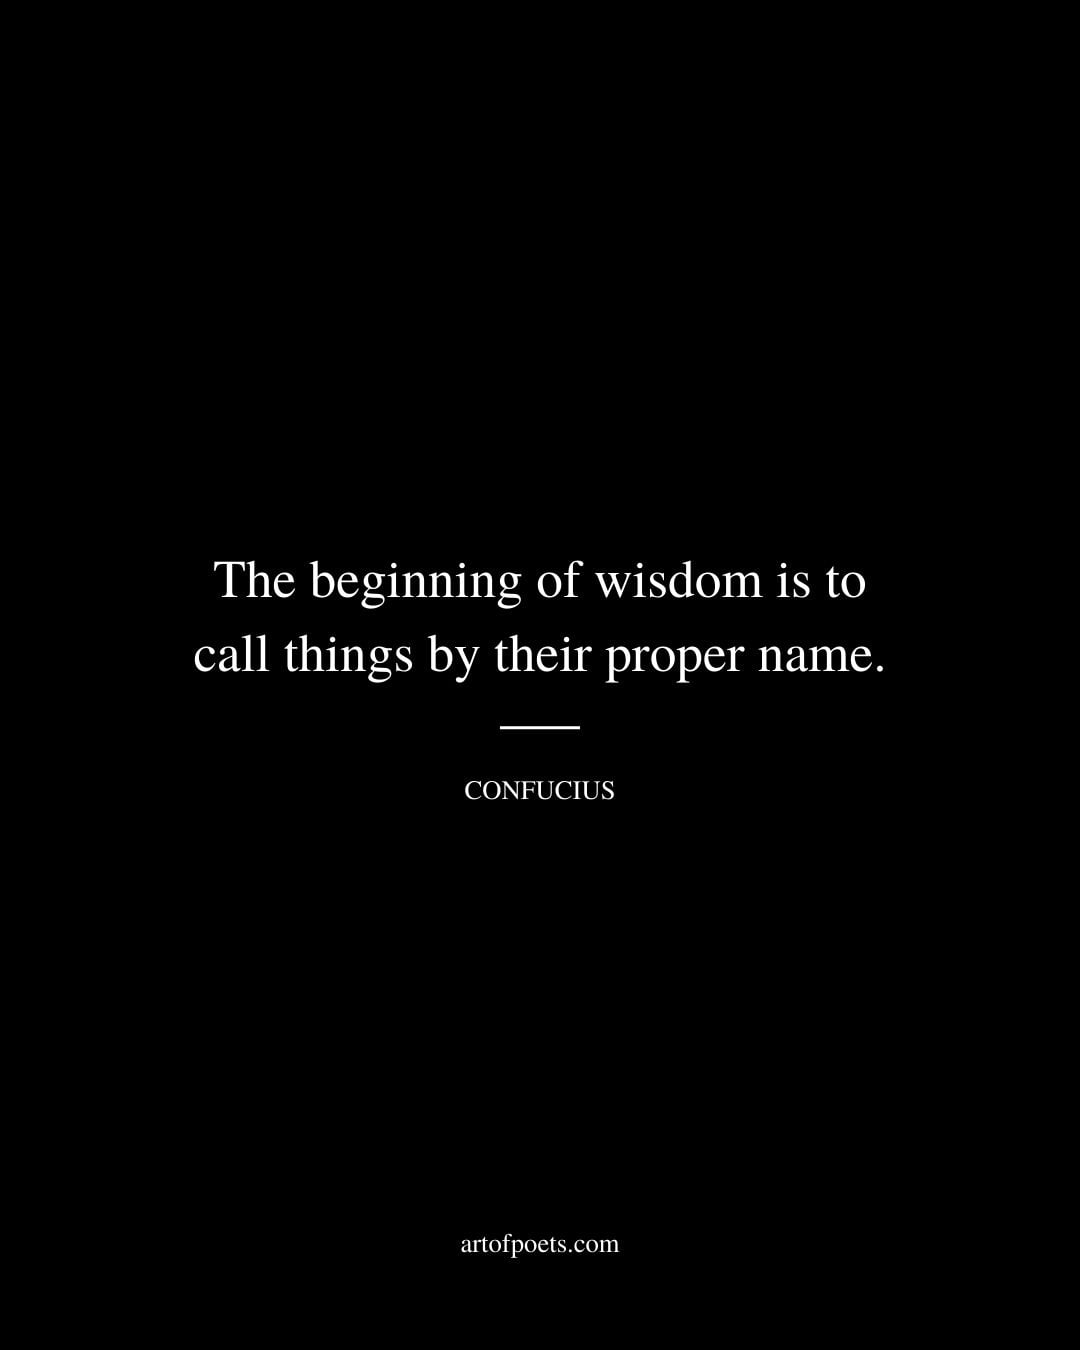 The beginning of wisdom is to call things by their proper name